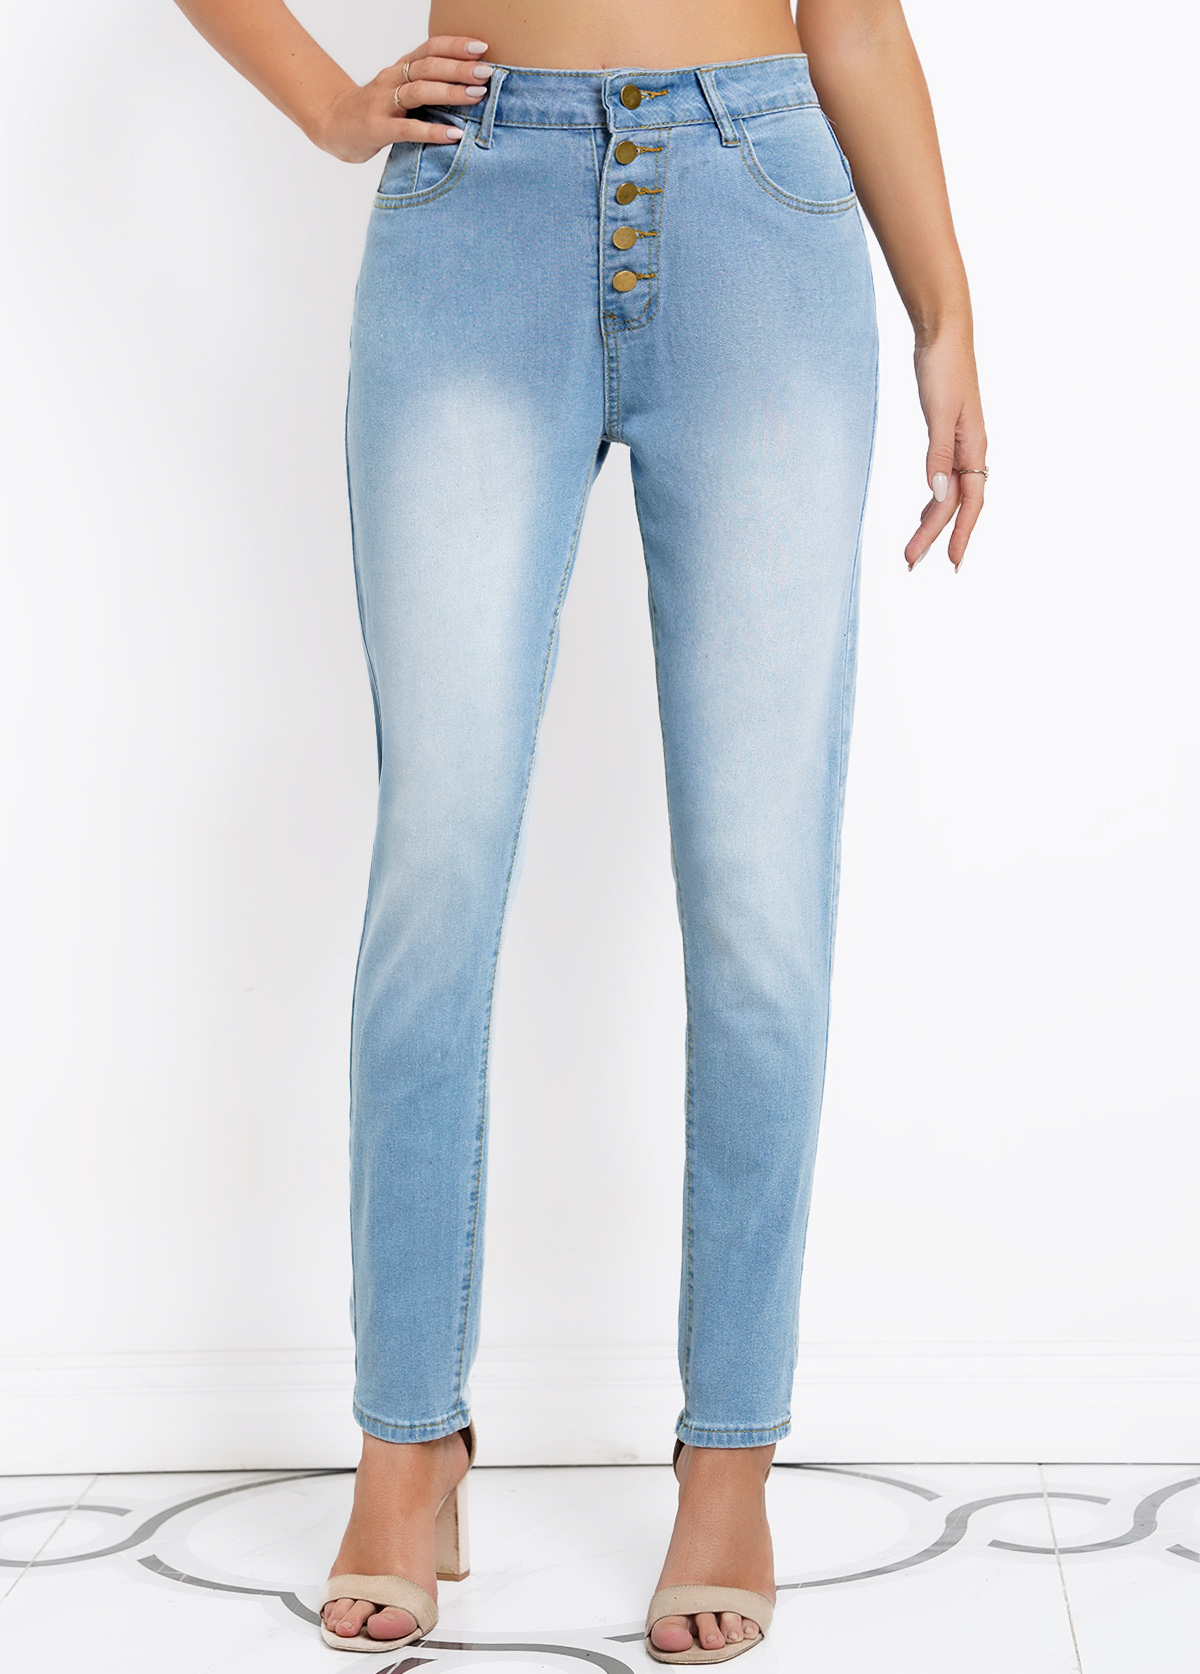 Button Denim Blue Skinny High Waisted Jeans